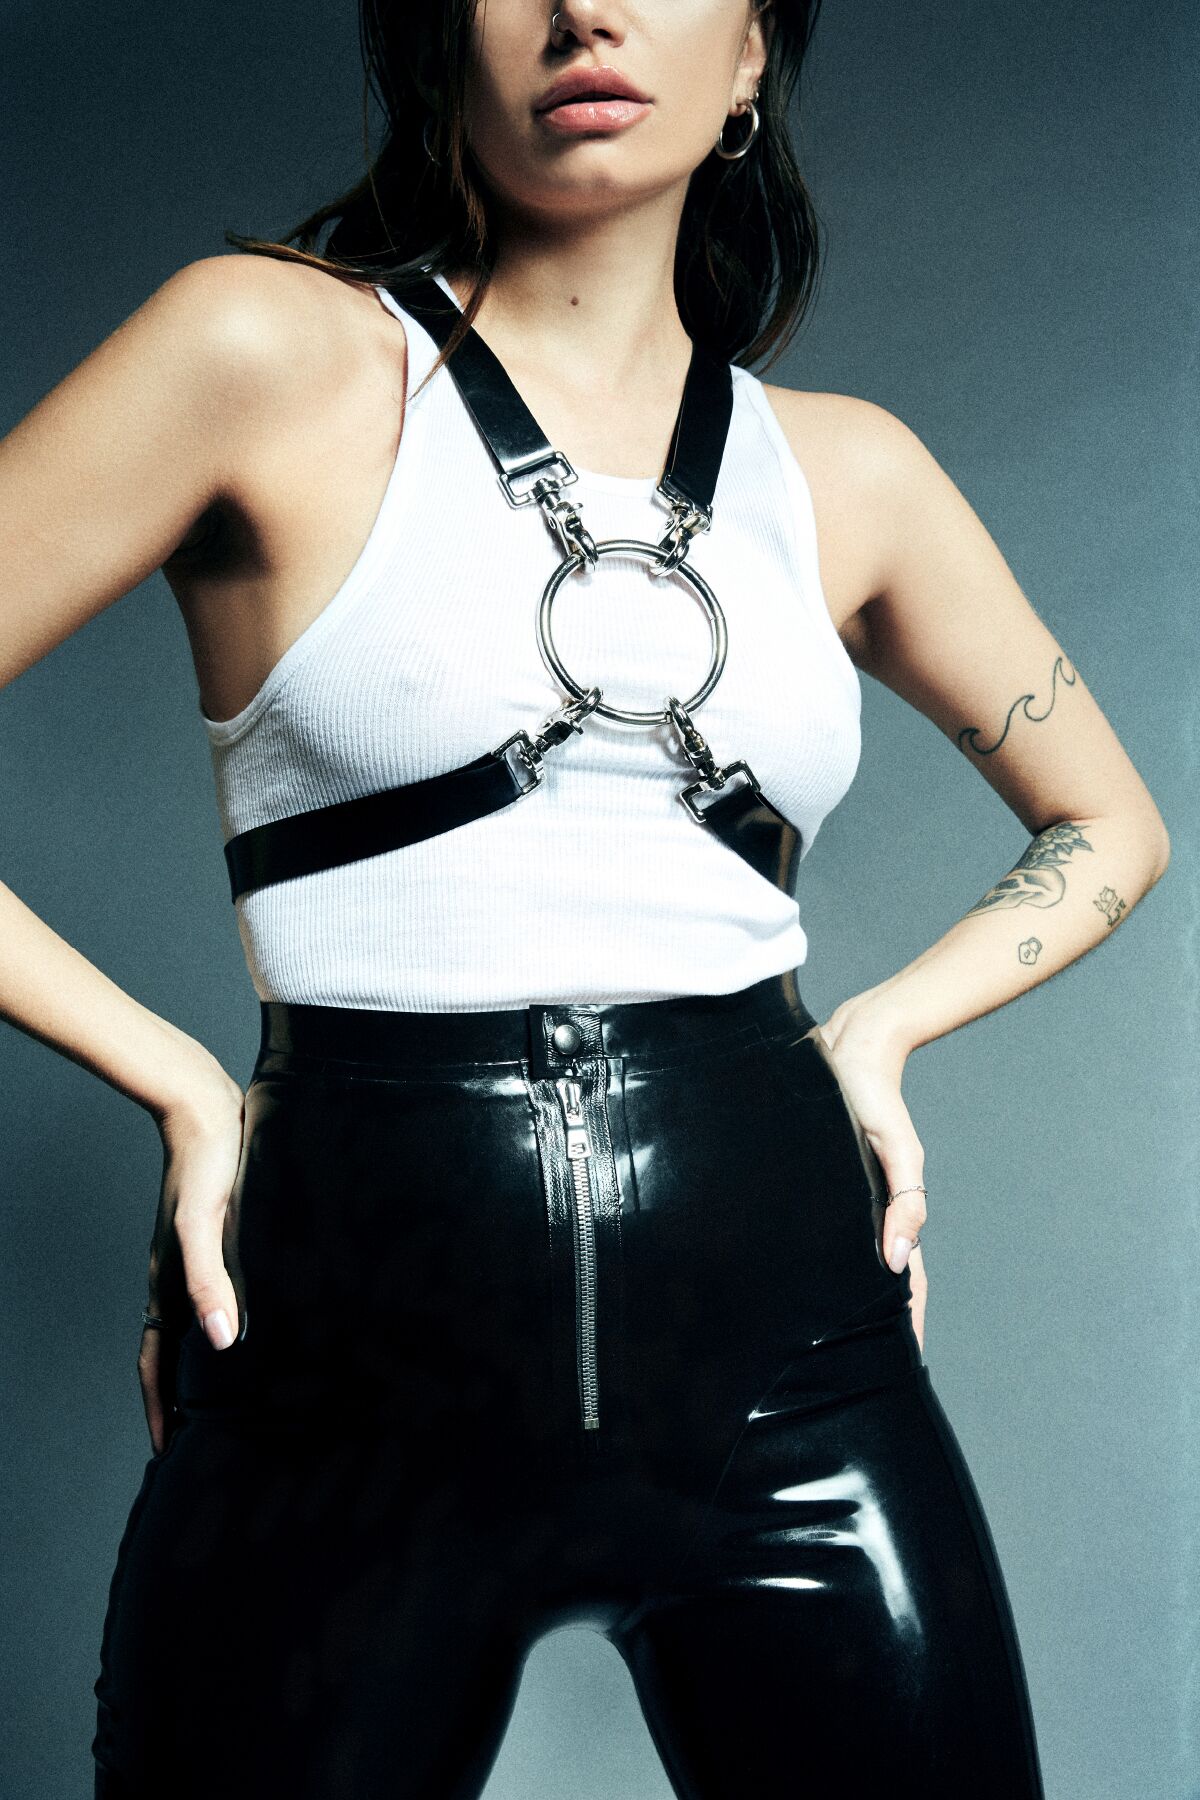 A model wears black pants with a white tank top and a black harness with a large silver ring in the middle.